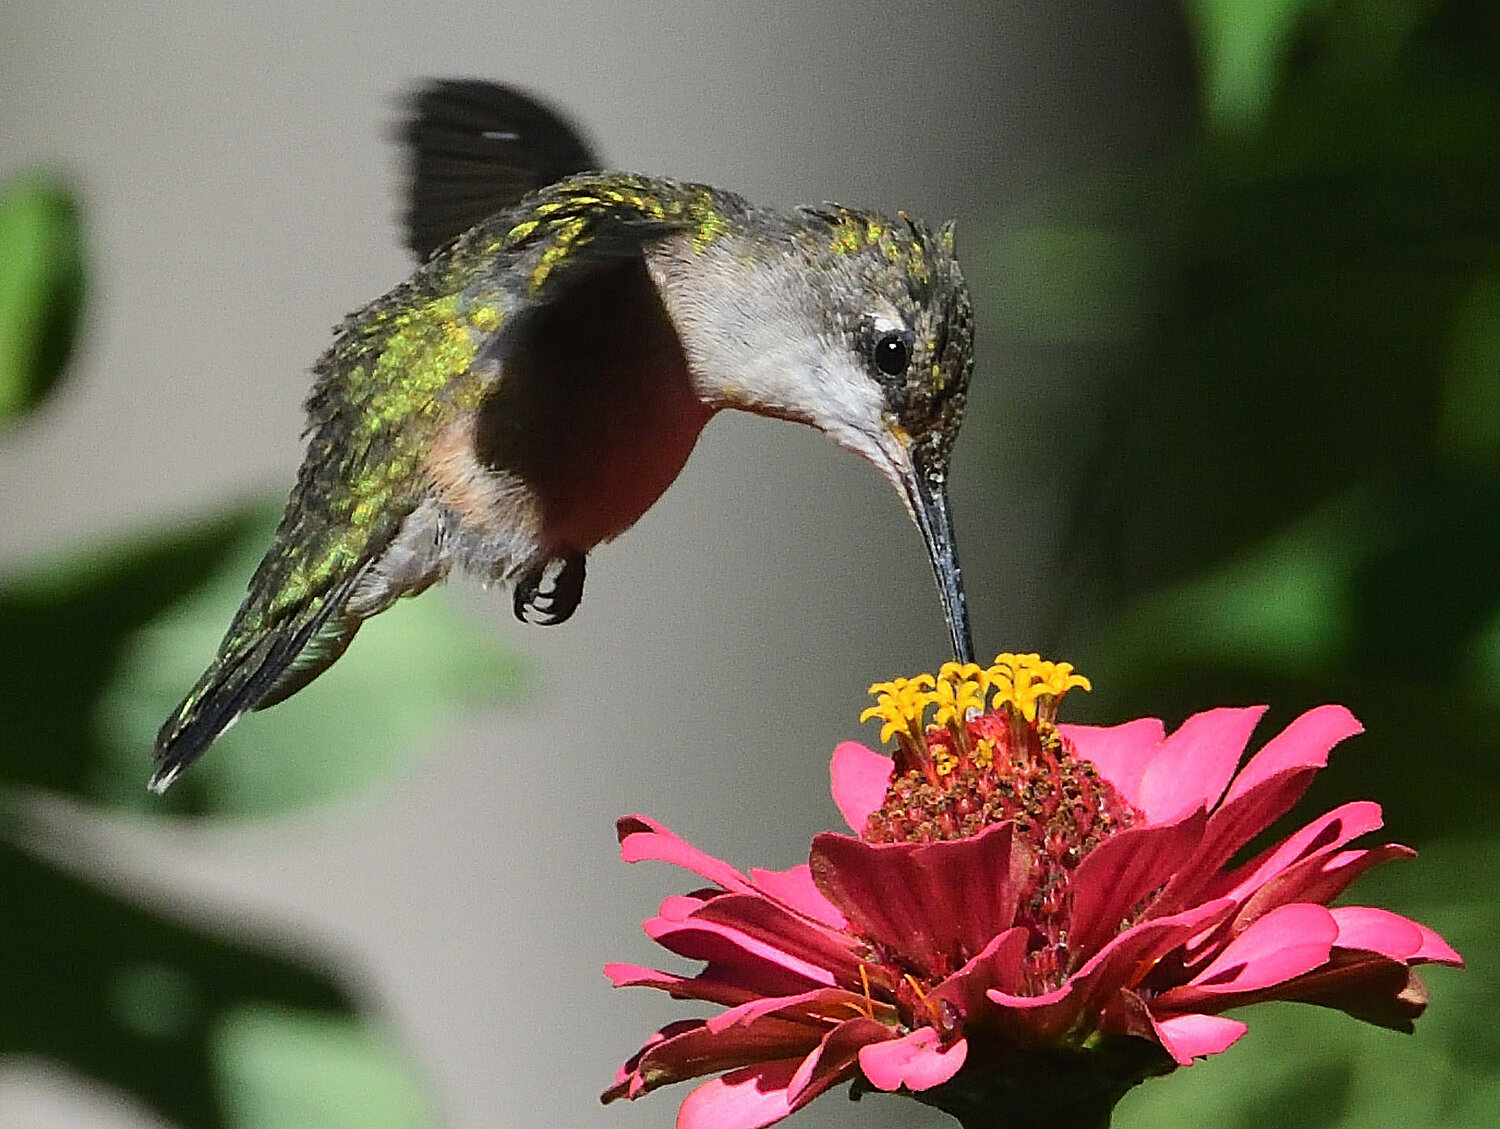 This is a female ruby-throated hummingbird in a neighbor’s garden. A variety of flowers in most gardens will attract hummingbirds, as well as a variety of butterfly species. ..Females lack the red patch on the throat. ..Hummingbirds have a thin tongue that extends outward from the bill, and aids with collecting nectar from flowers. The hummingbirds' act of feeding aids in the pollination of many species of flowering plants.